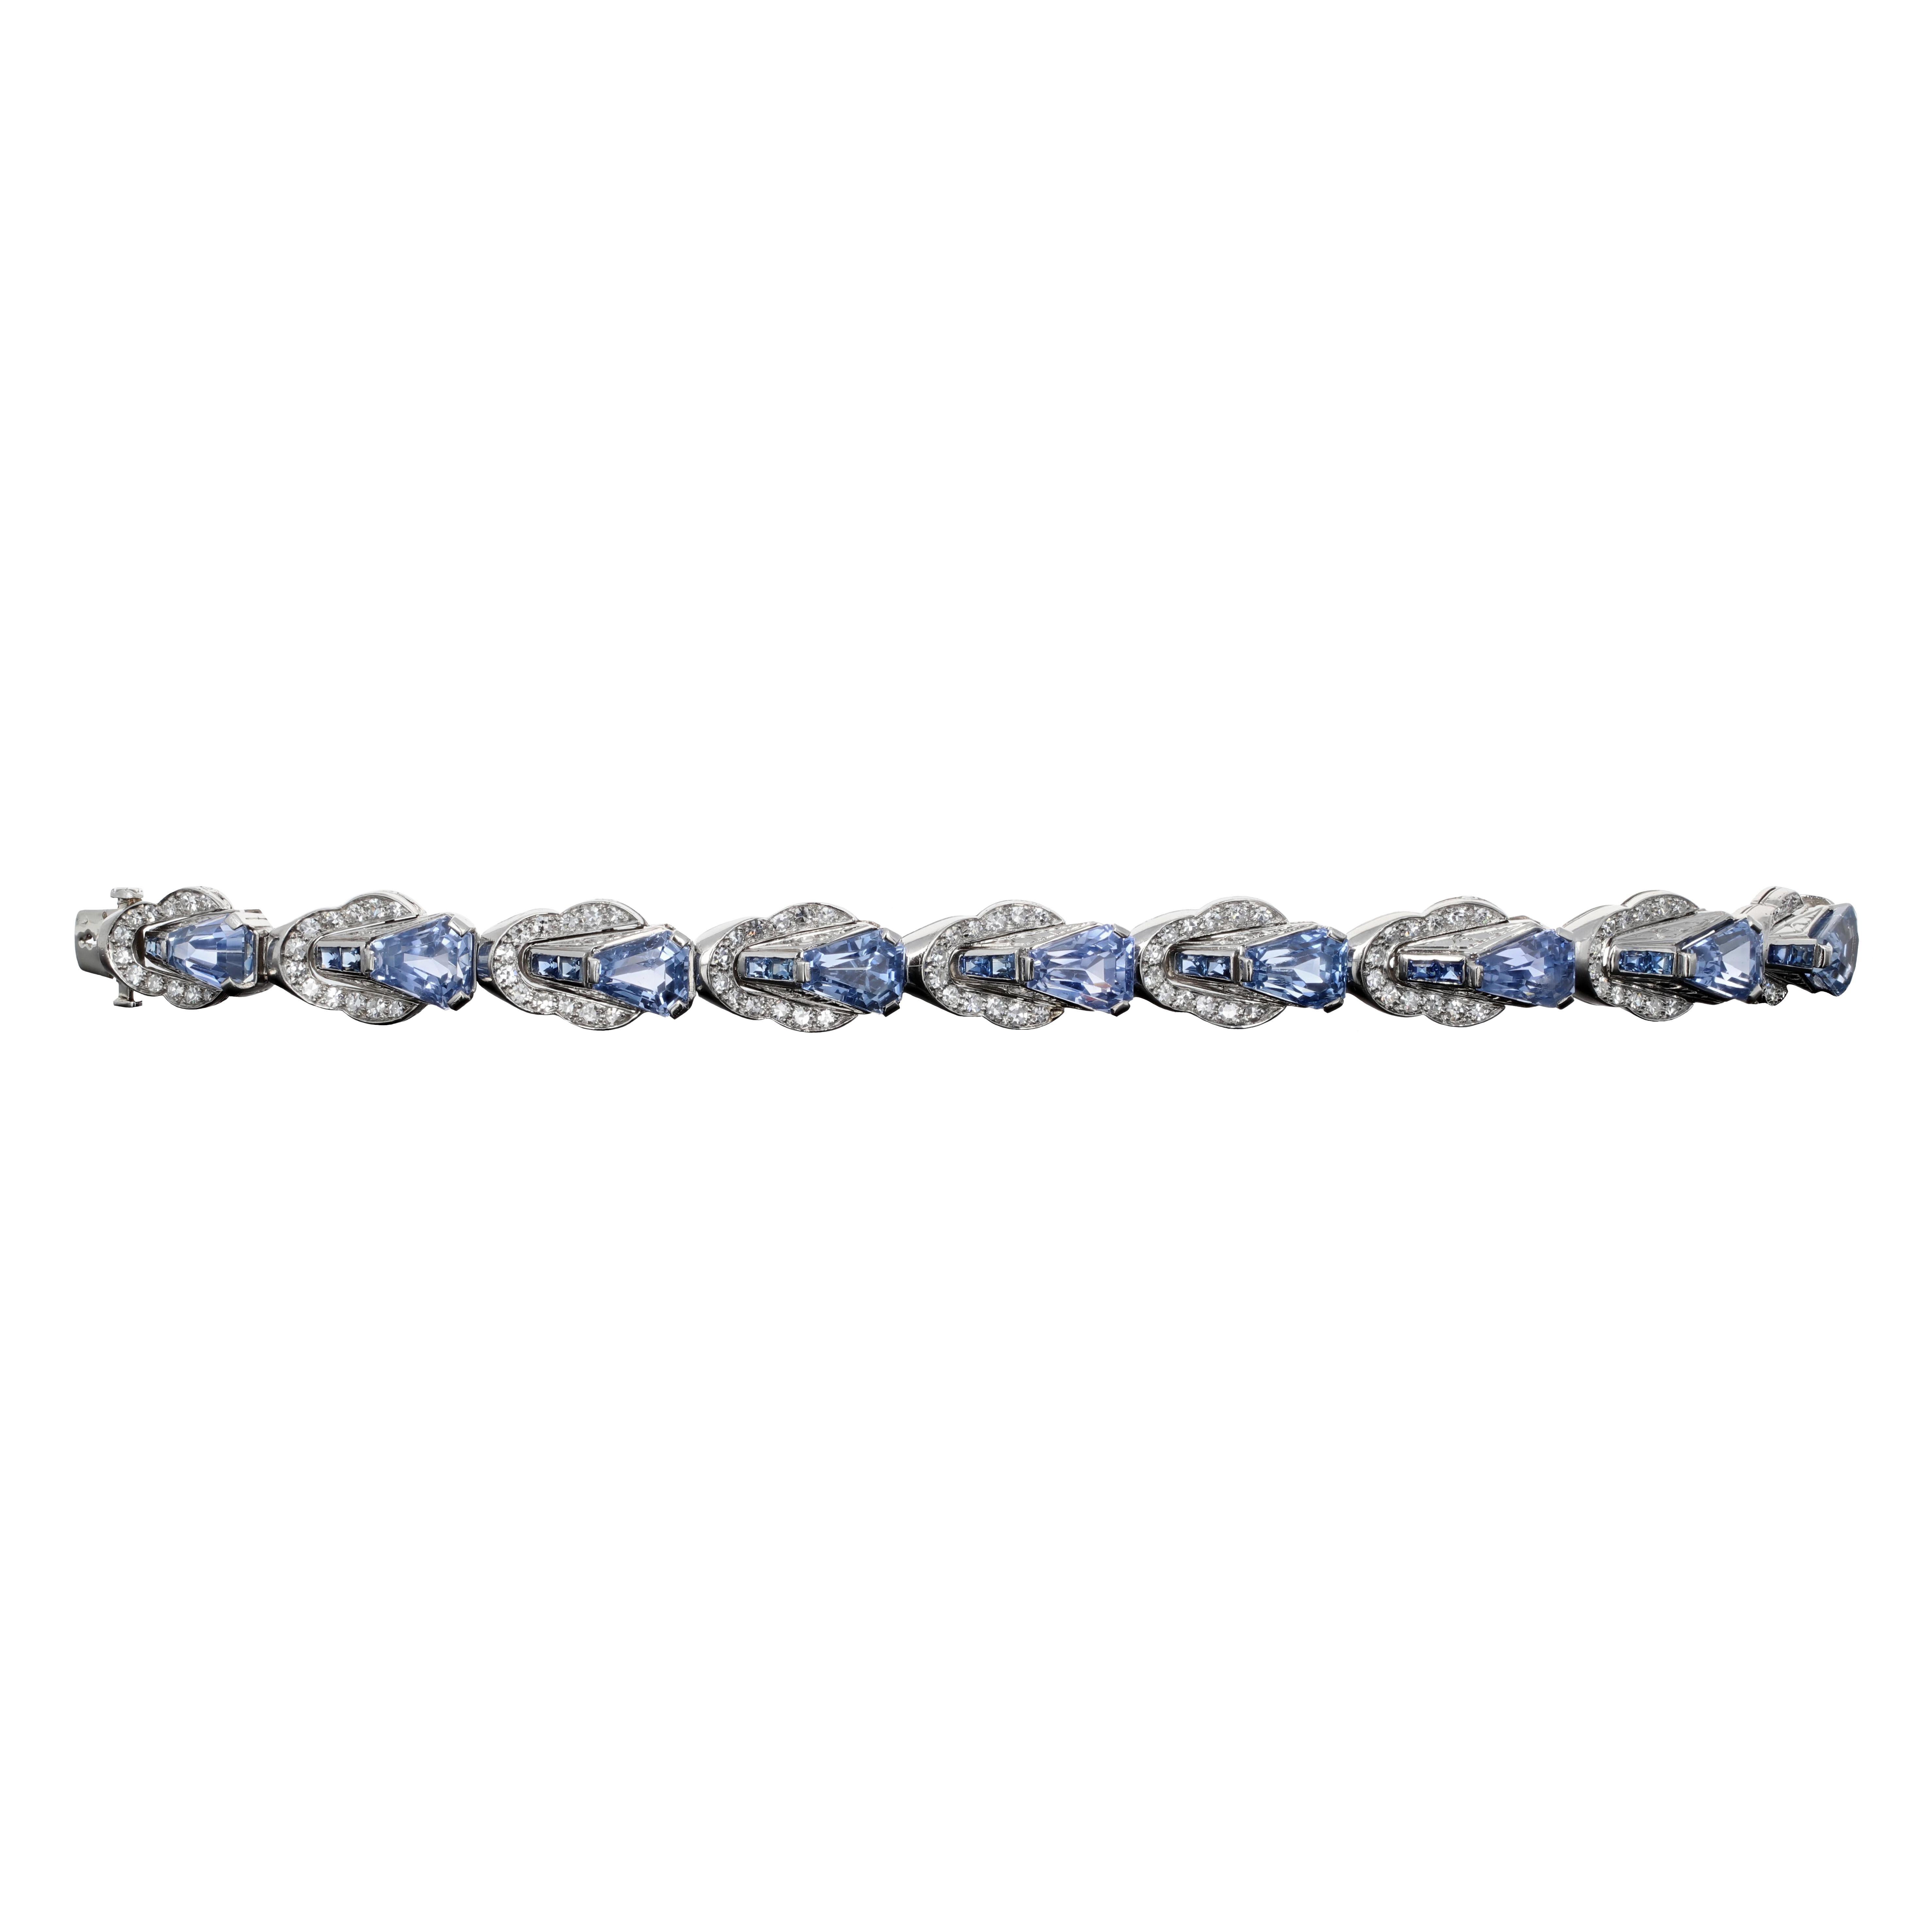 Authentic Oscar Heyman palladium and gold sapphire and diamond bracelet retro link bracelet. This bracelet is from the 1940's and is in excellent condition. There is an estimated 27.50 carat total weight of natural blue sapphires in the bracelet.